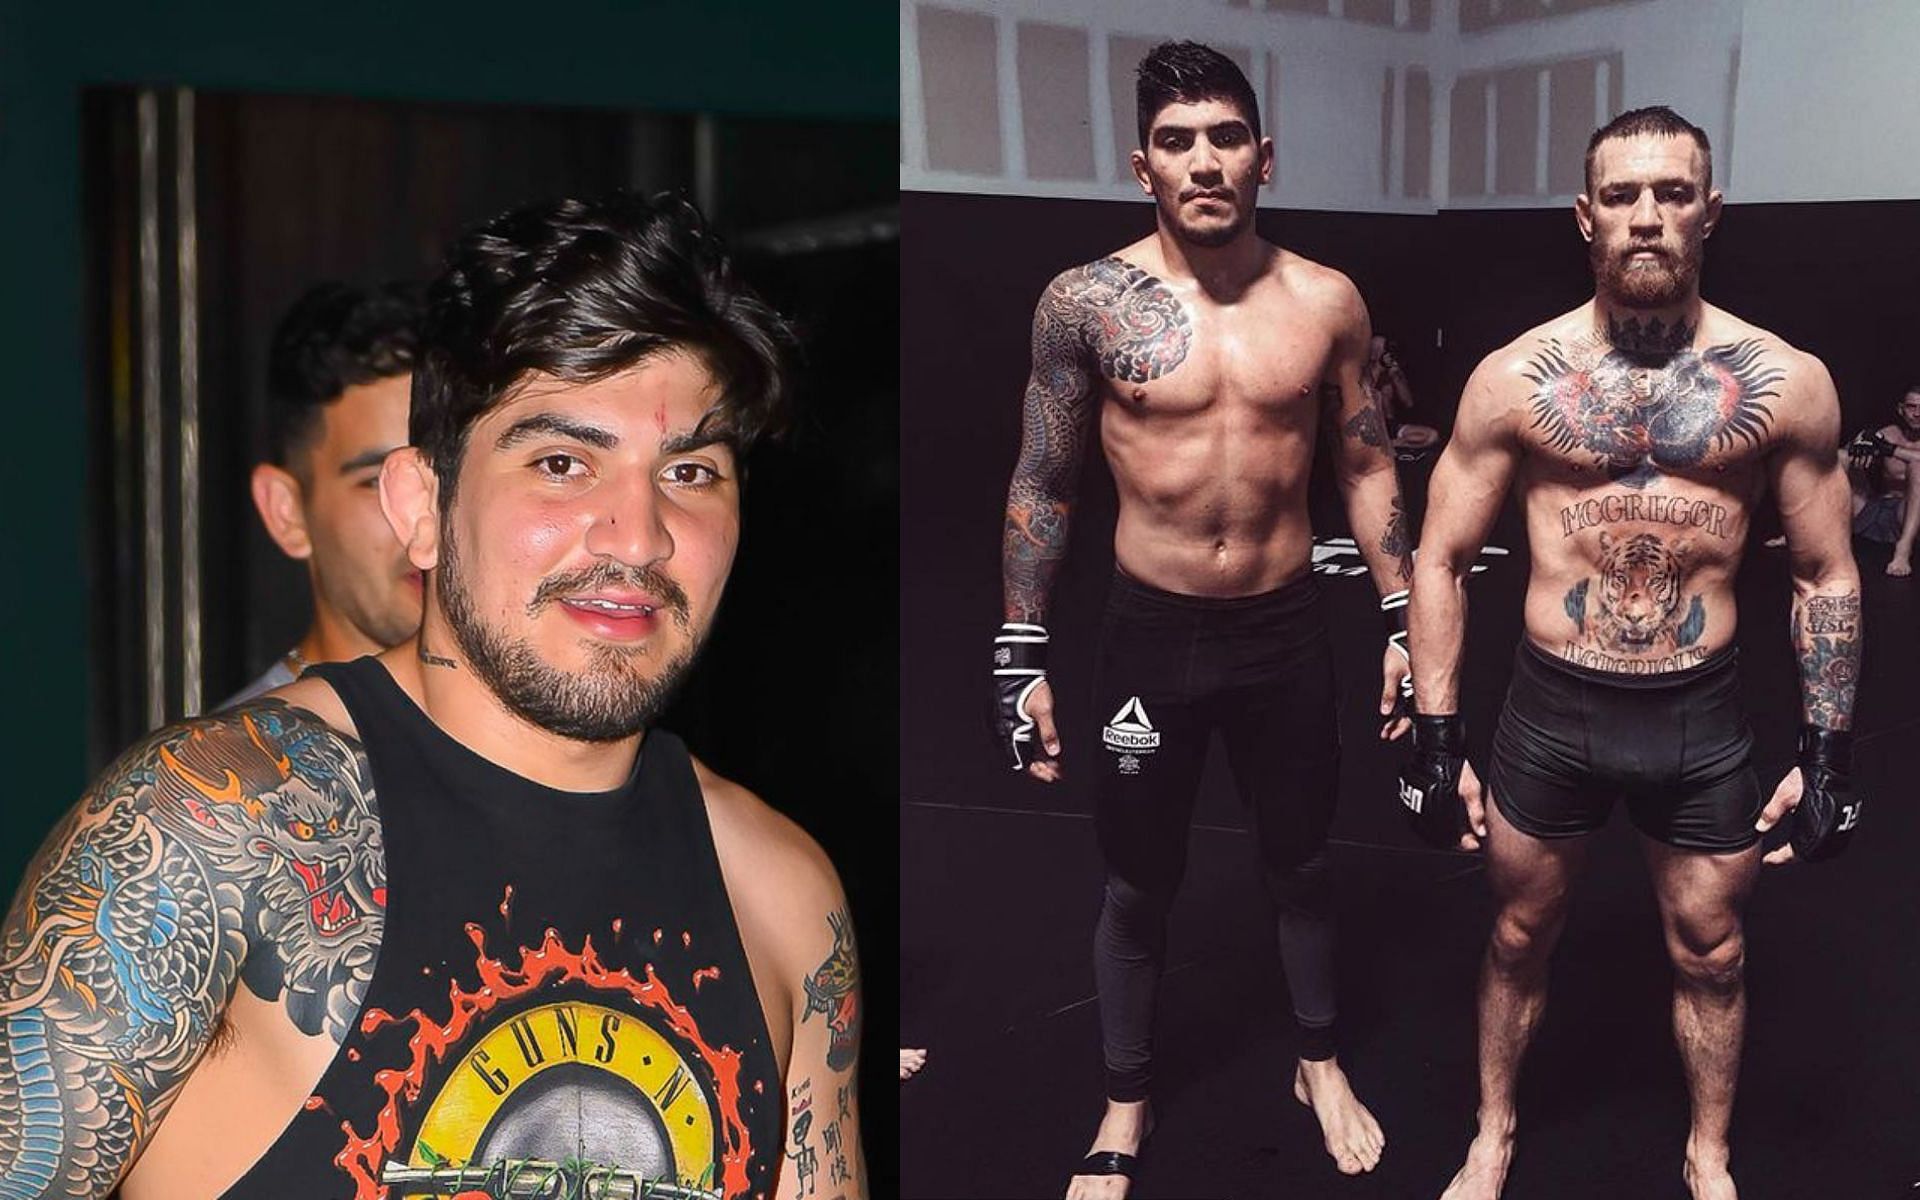 Dillon Danis (left) Conor McGregor and Dillon Danis (right) [Image Courtesy: Getty Images, @dillondanis on Instagram]